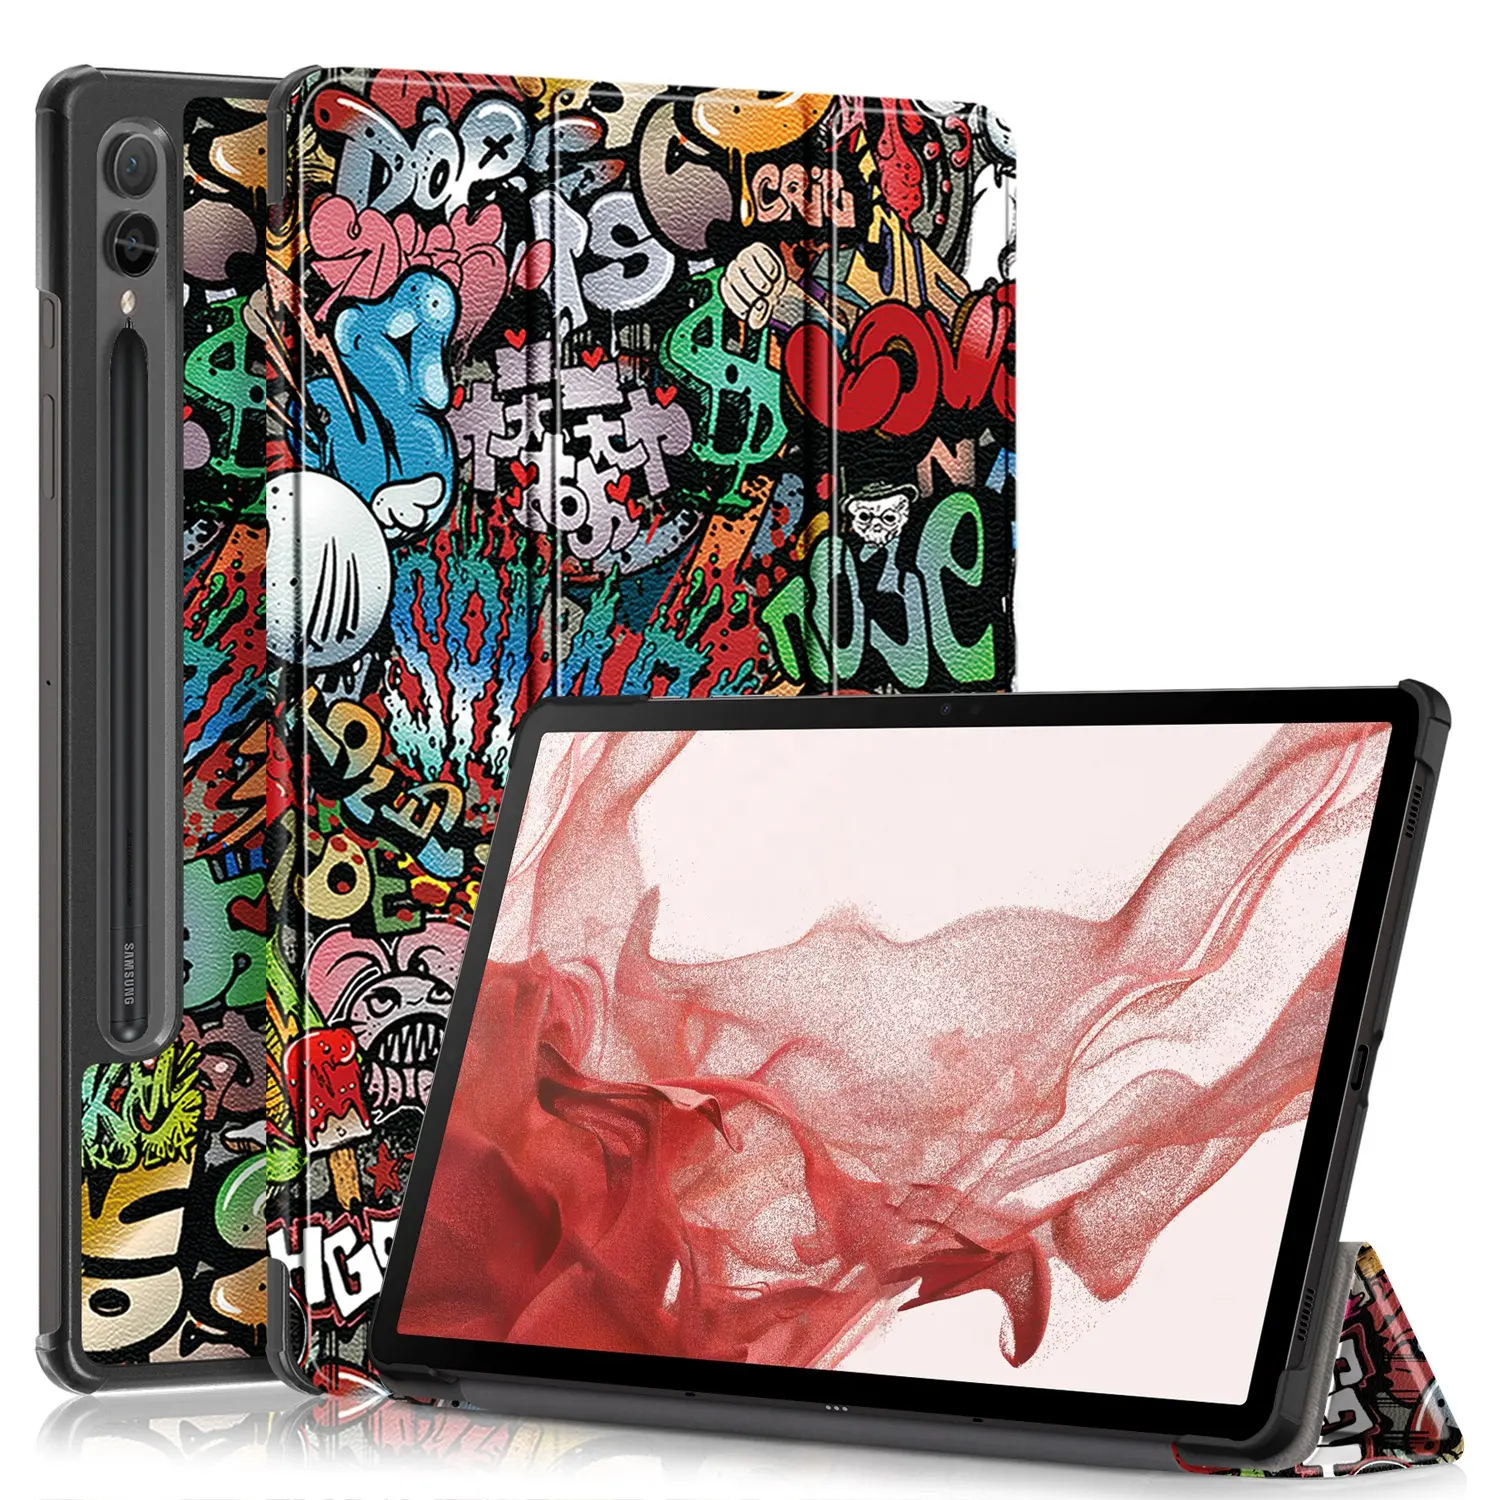 Wholesale ipad cases for Samsung galaxy tab s9 ultra tablet covers & cases ipad accessories